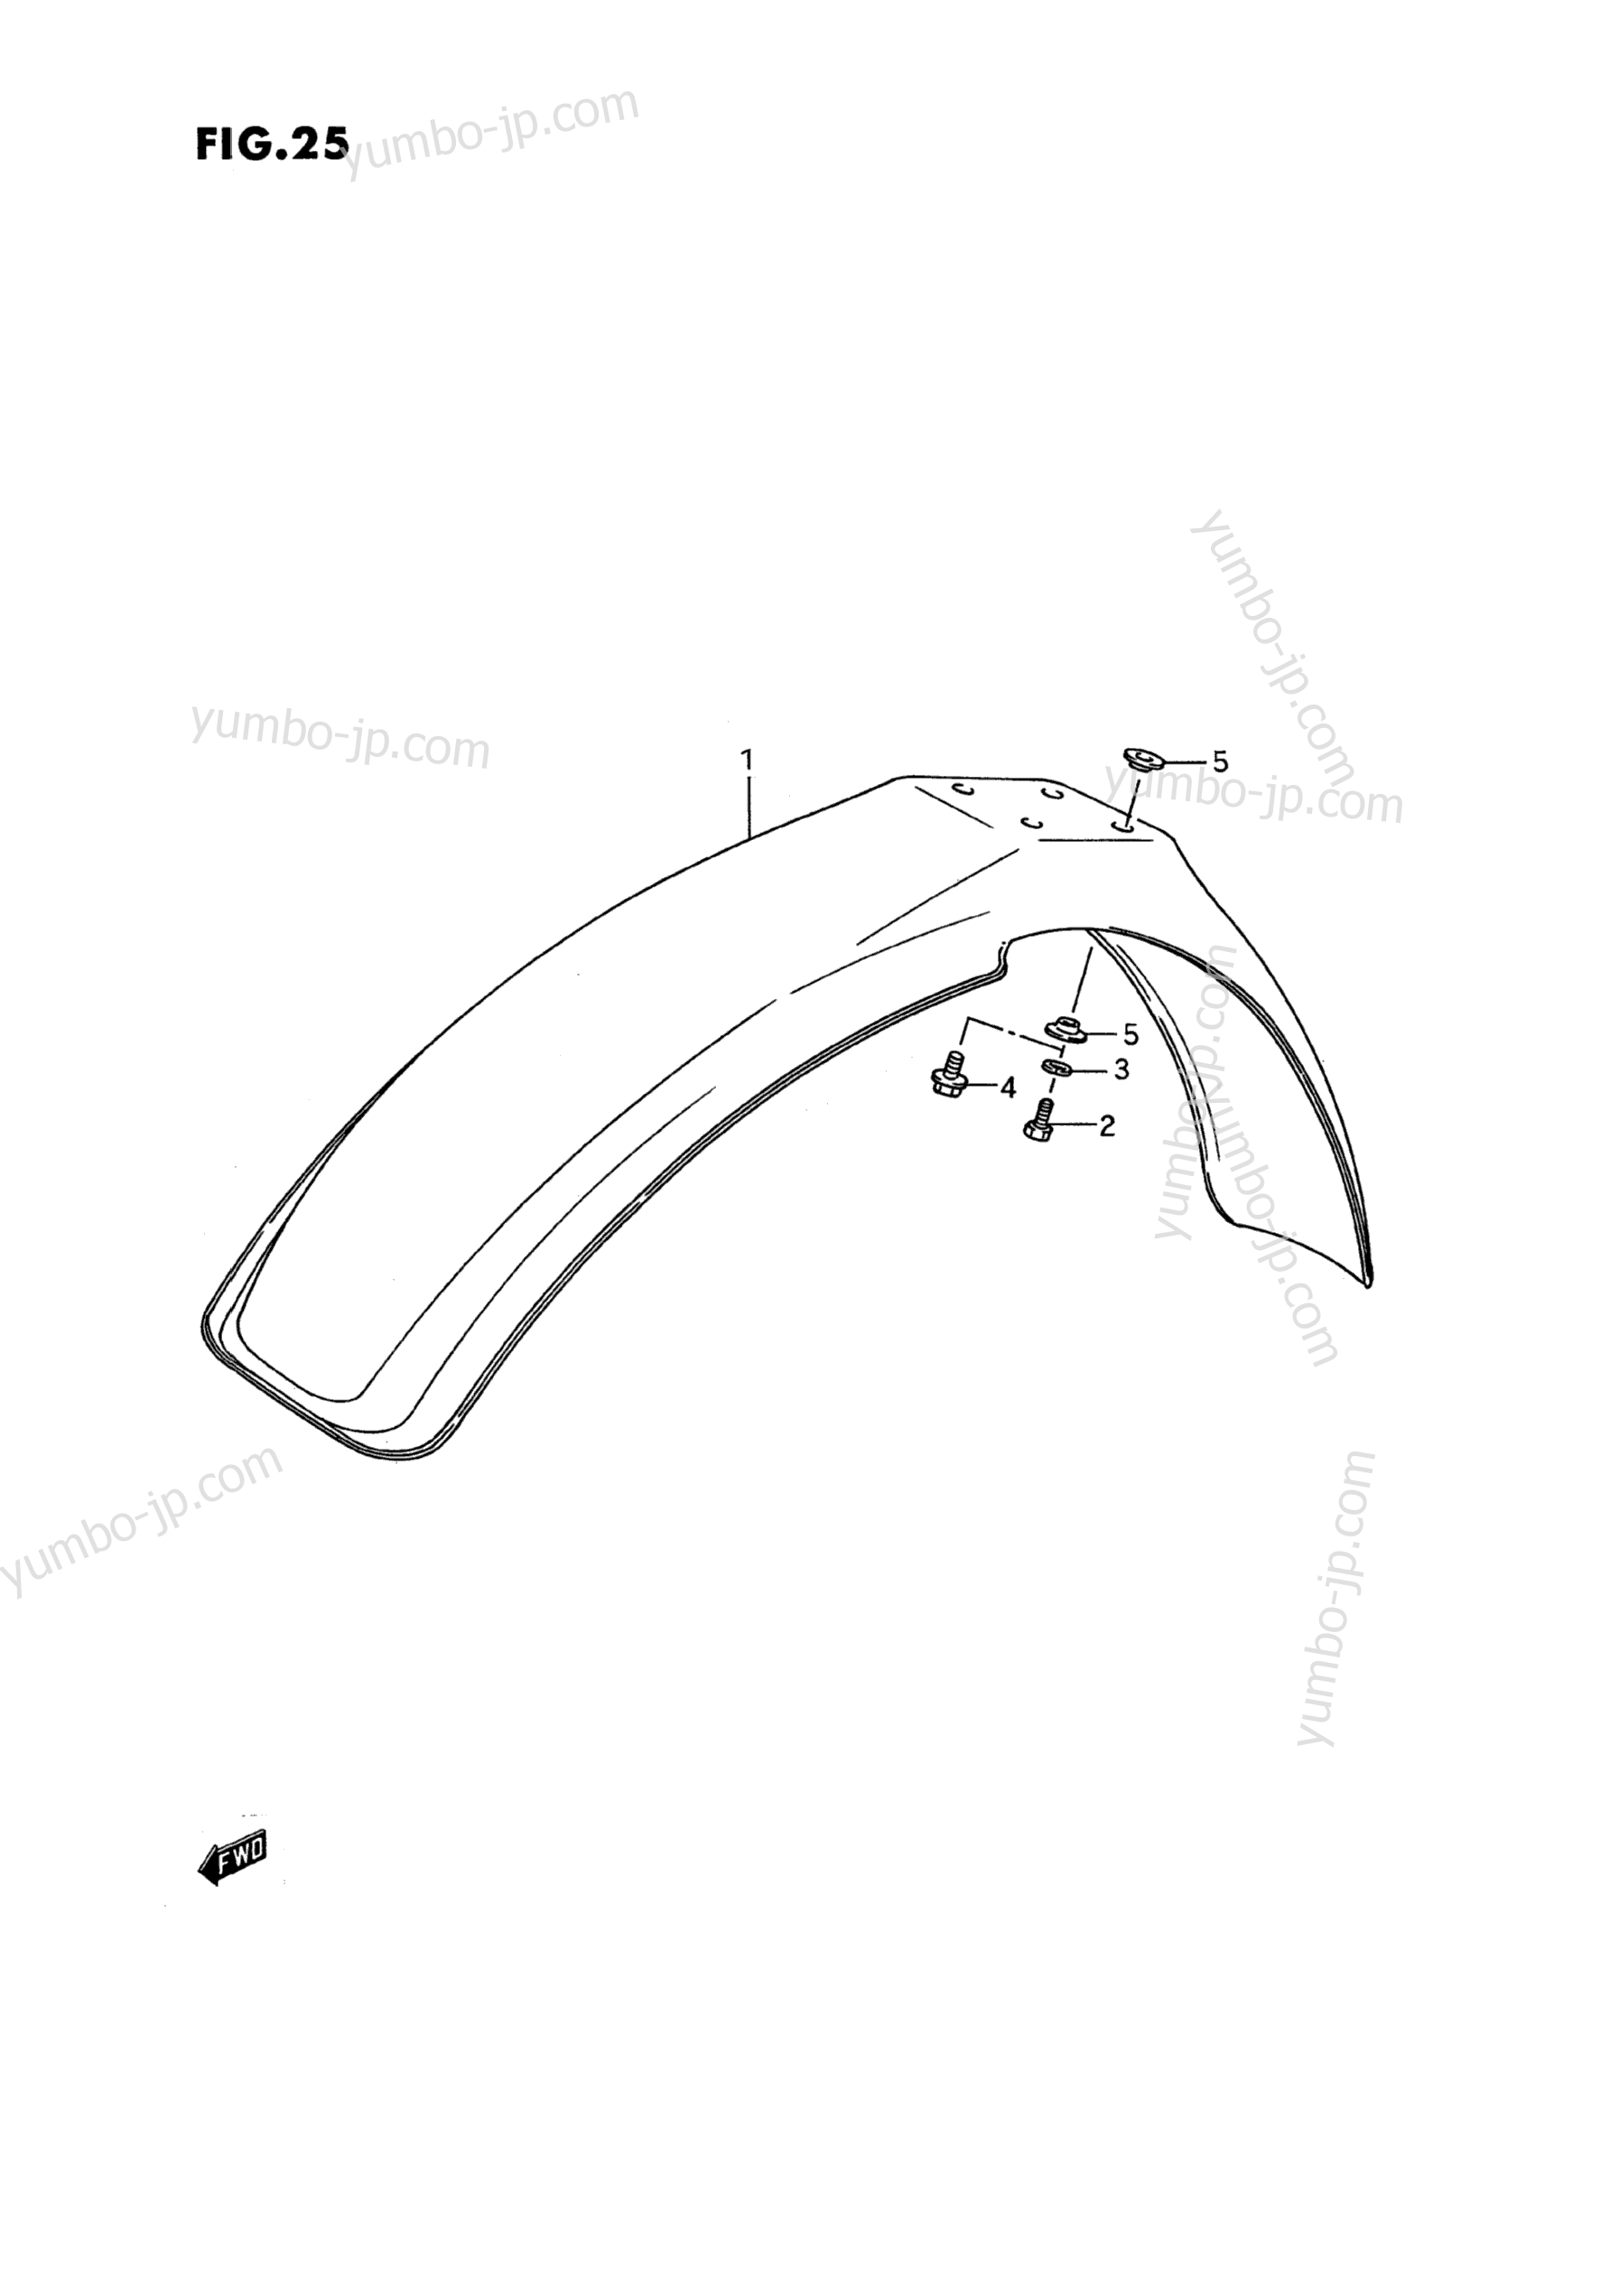 FRONT FENDER for motorcycles SUZUKI RM80 1986 year